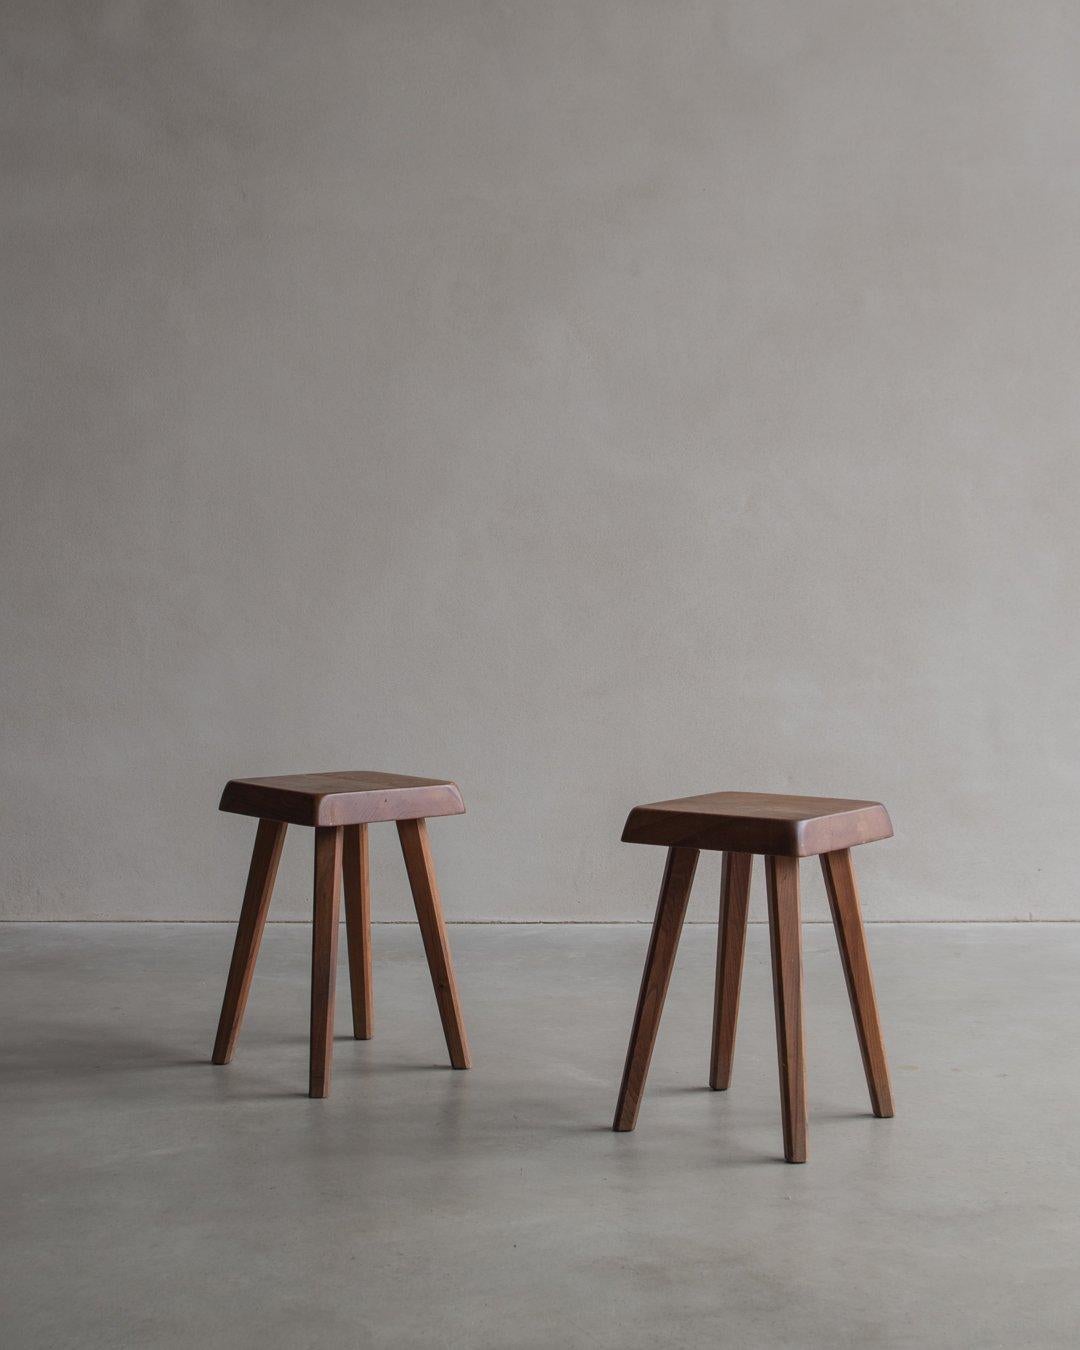 The S01 Stool, designed by the renowned French architect Pierre Chapo in the 1960s, features a square seat with rounded and inclined edges, supported by four legs. The craftsmanship highlights the quality of woodworking and the minimalist aesthetic